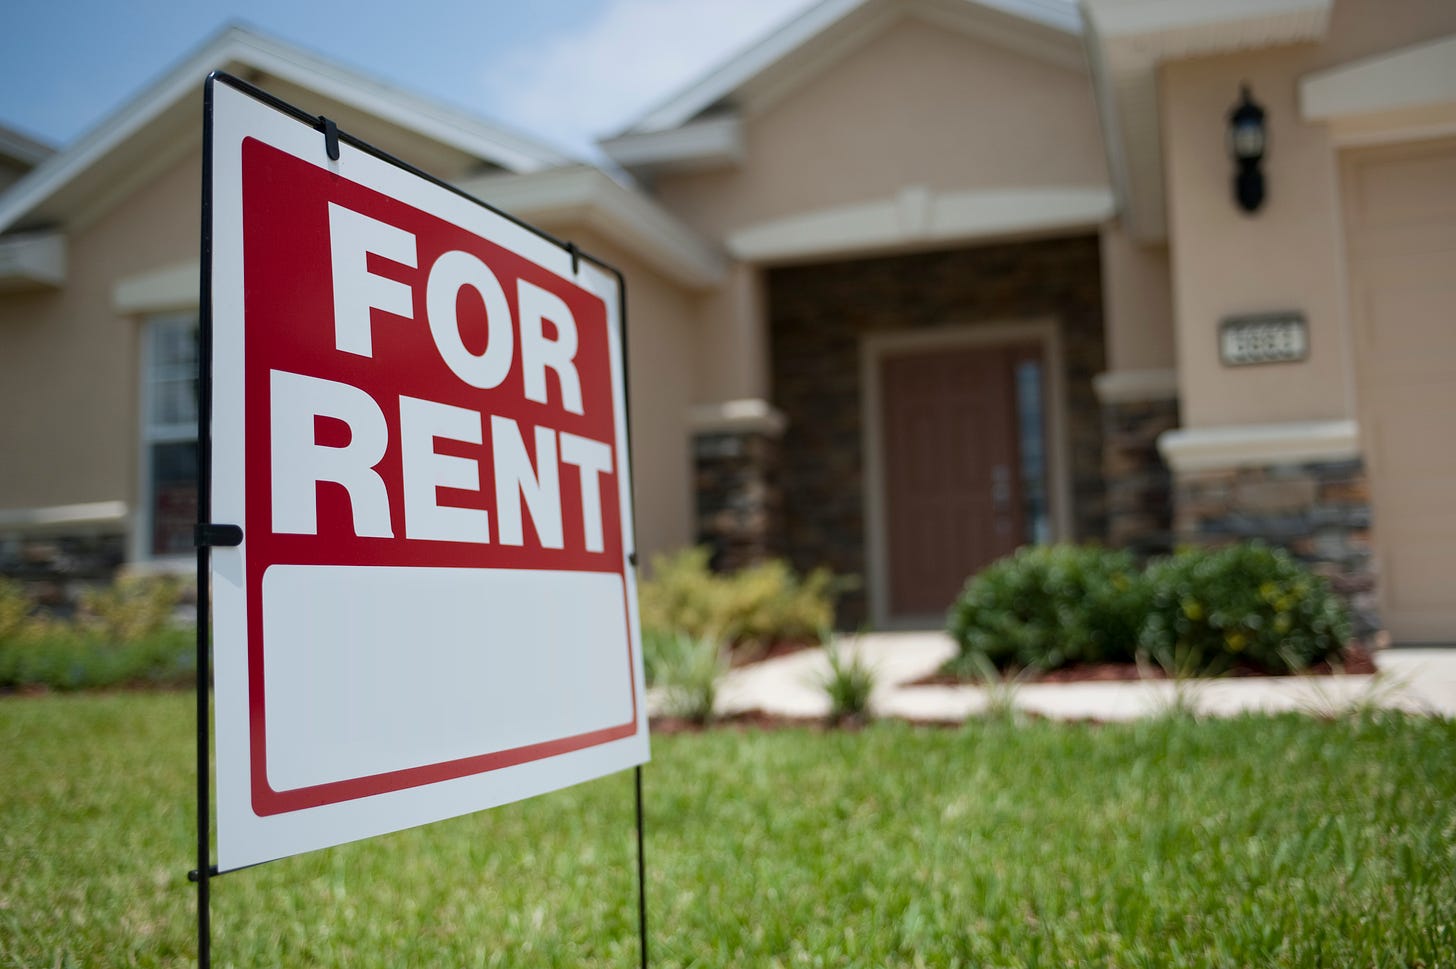 There Is Hidden Value in American Homes 4 Rent | The Motley Fool